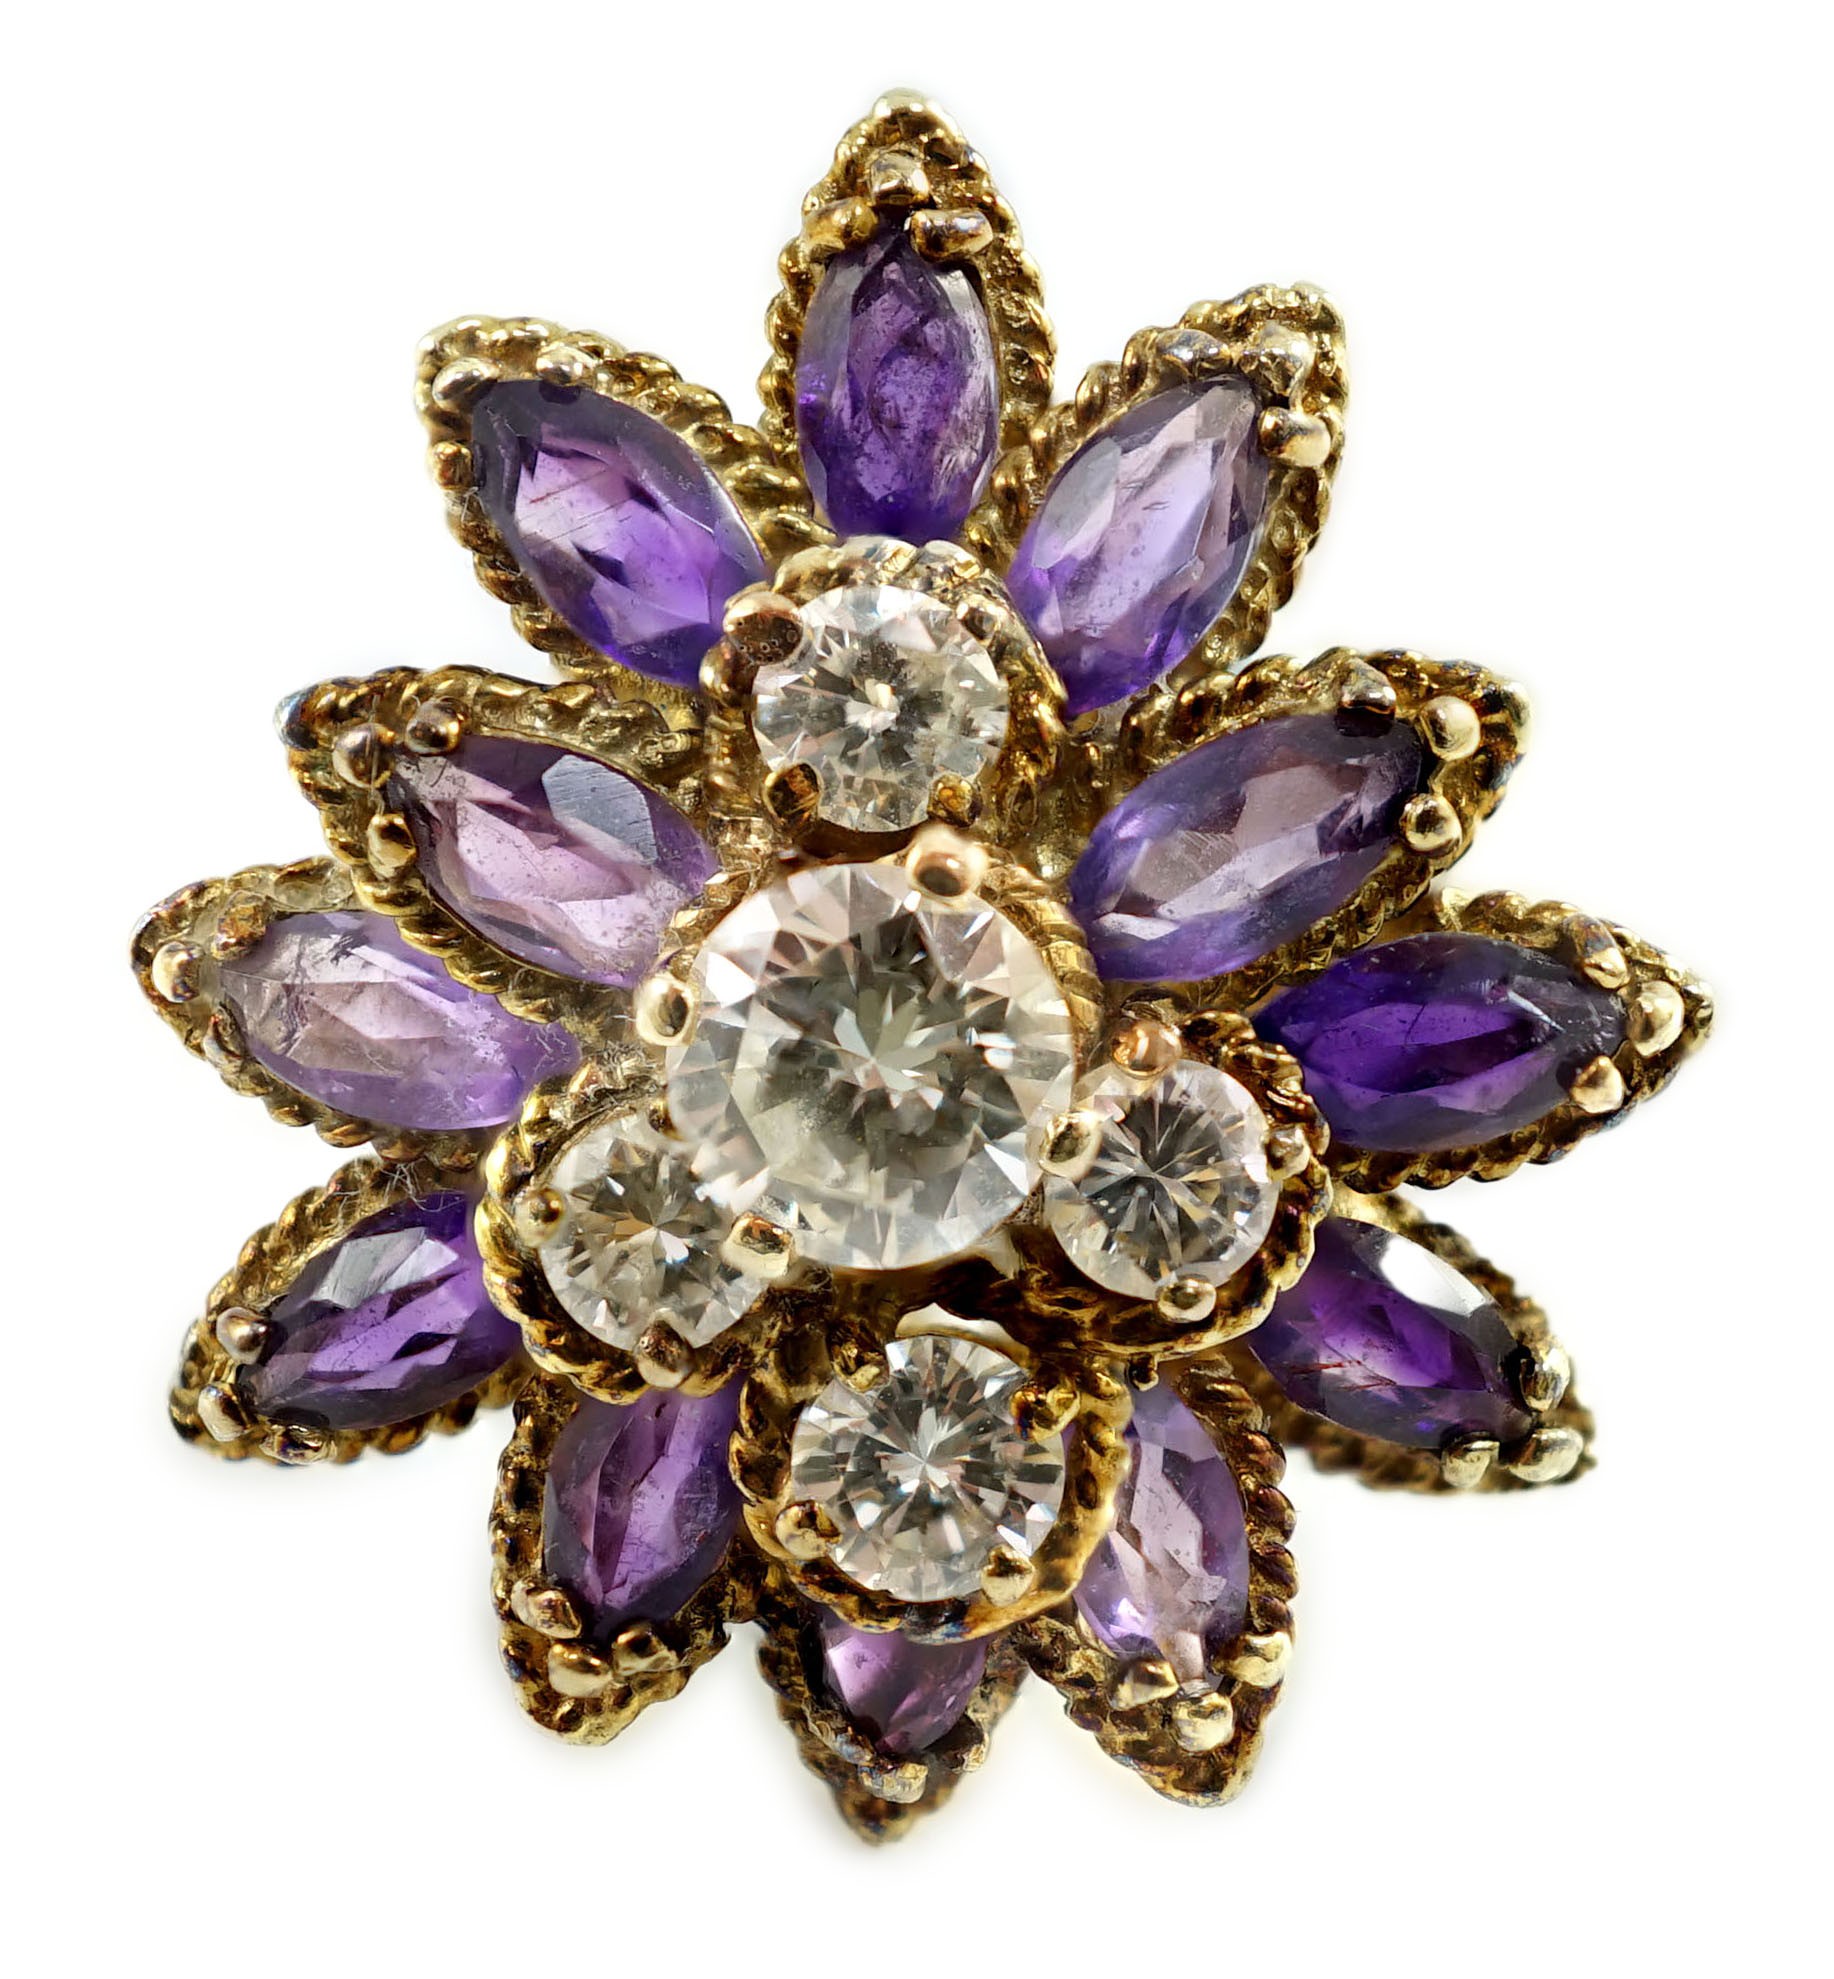 A 14k gold, five stone graduated round cut diamond and twelve stone marquise cut amethyst set cluster dress ring                                                                                                            